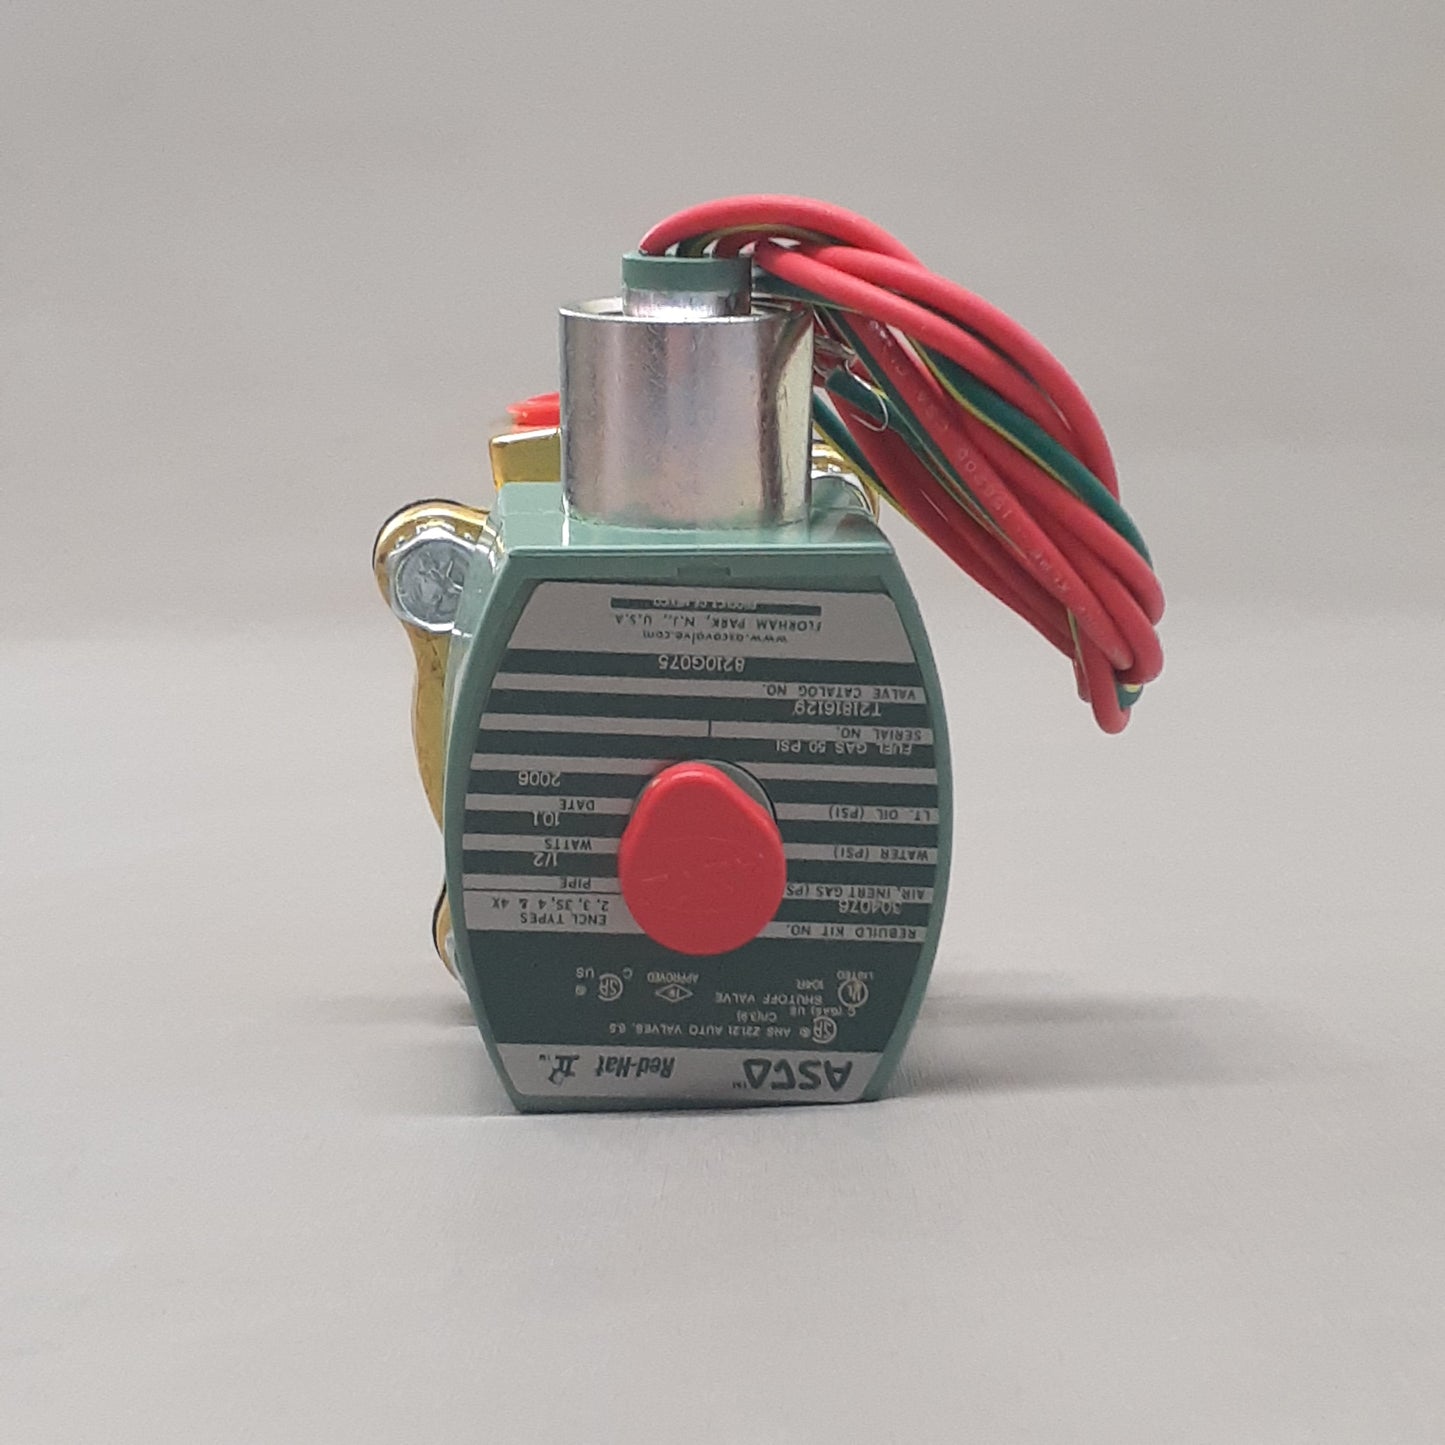 ASCO REDHAT Fuel Gas Solenoid Valve: 1/2 in Pipe Size, 50 psi Max. Op Pressure Differential Air/Inert Gas (New)